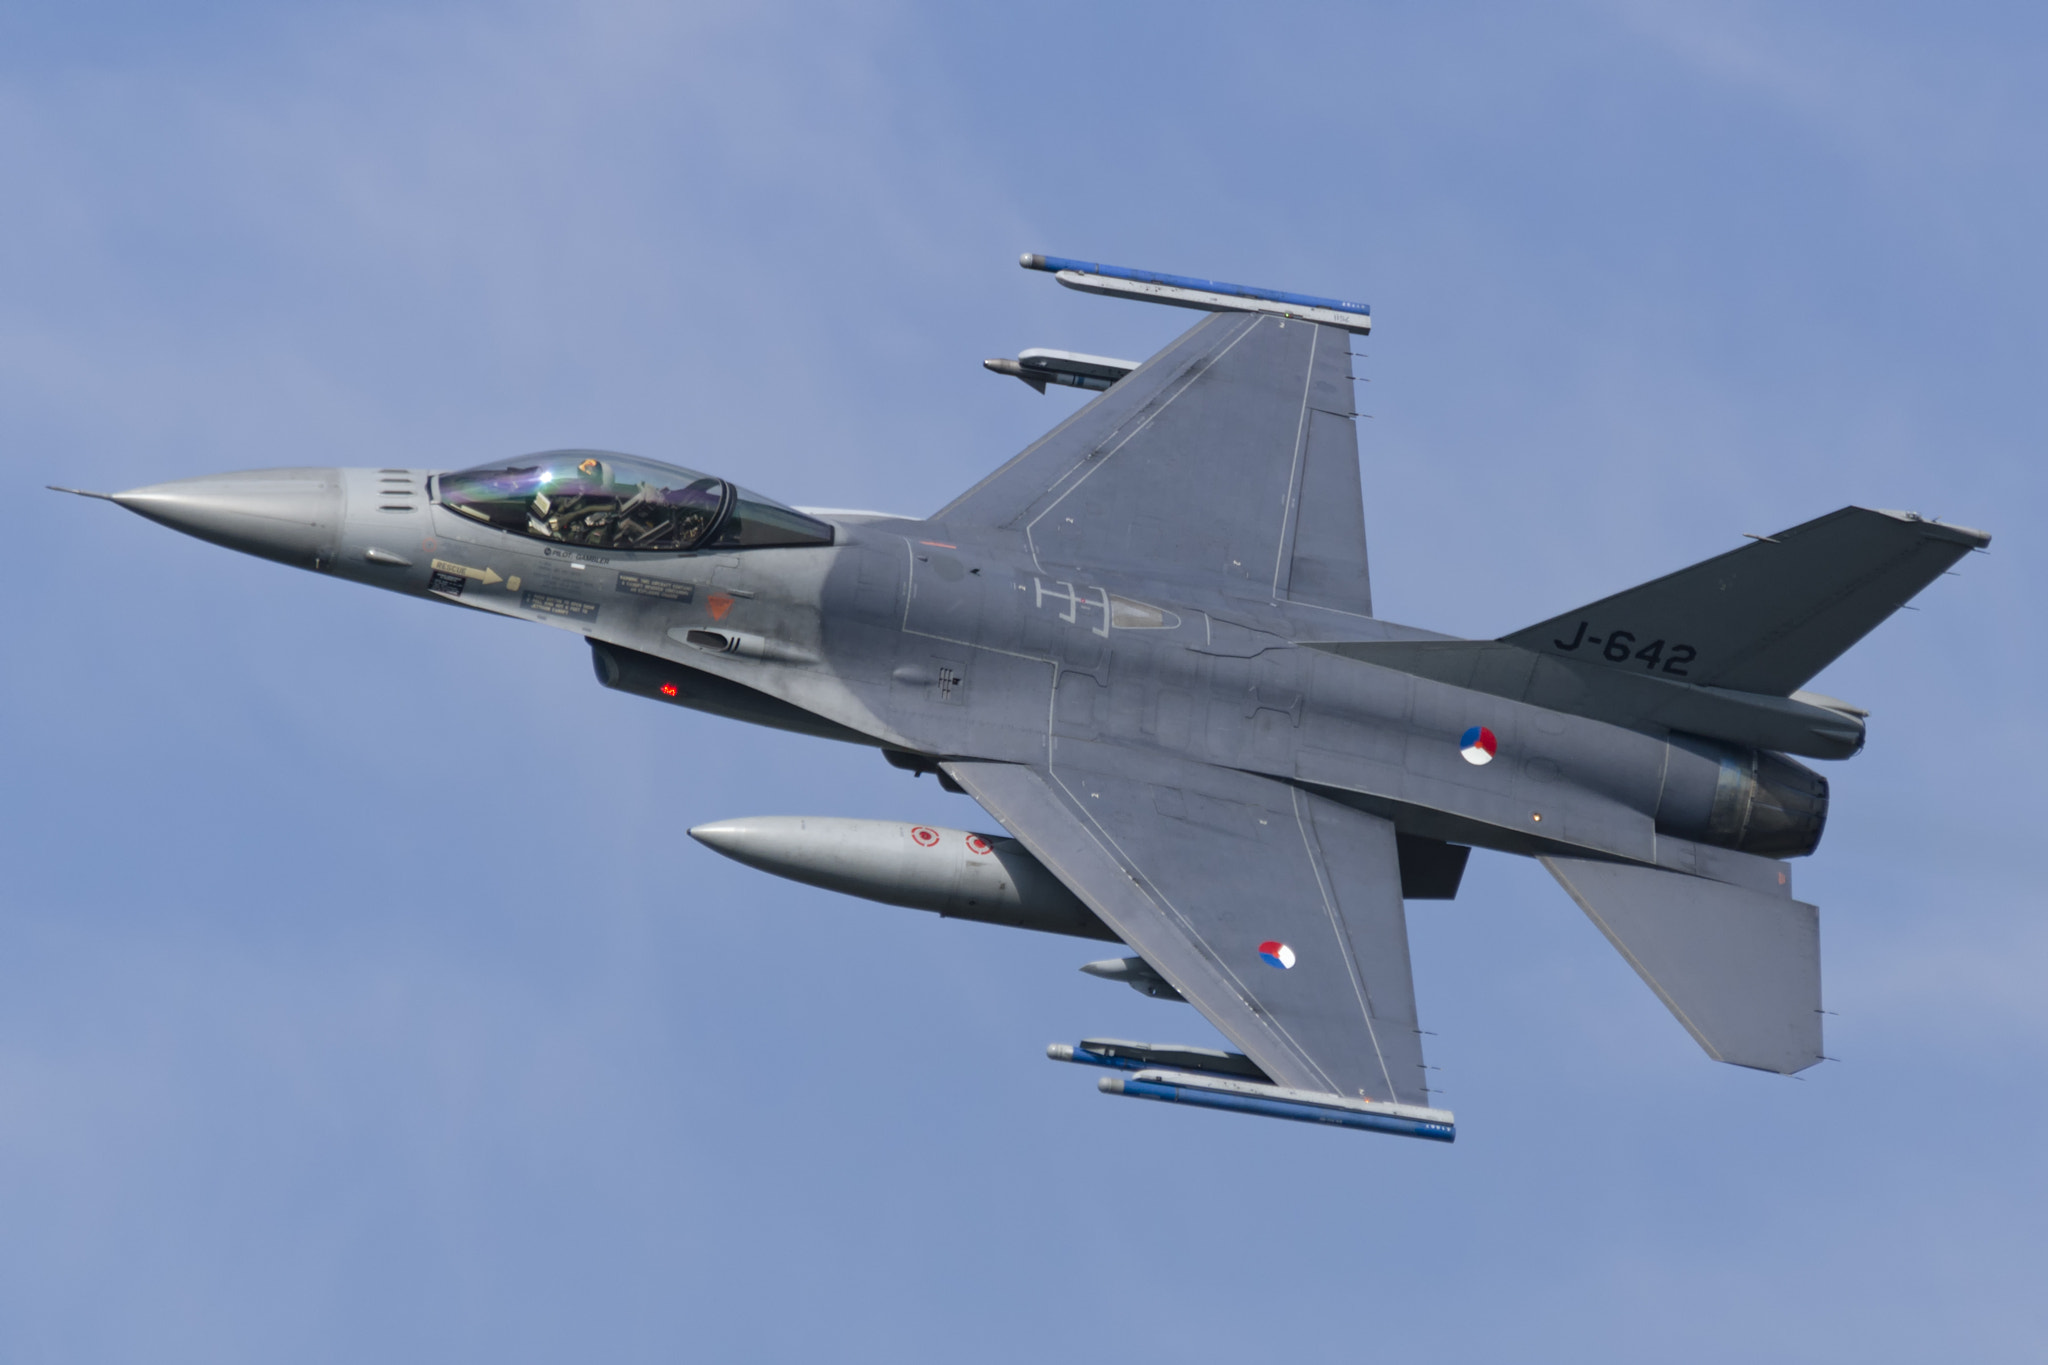 Nikon D7000 sample photo. Rnlaf f-16am fighting falcon photography